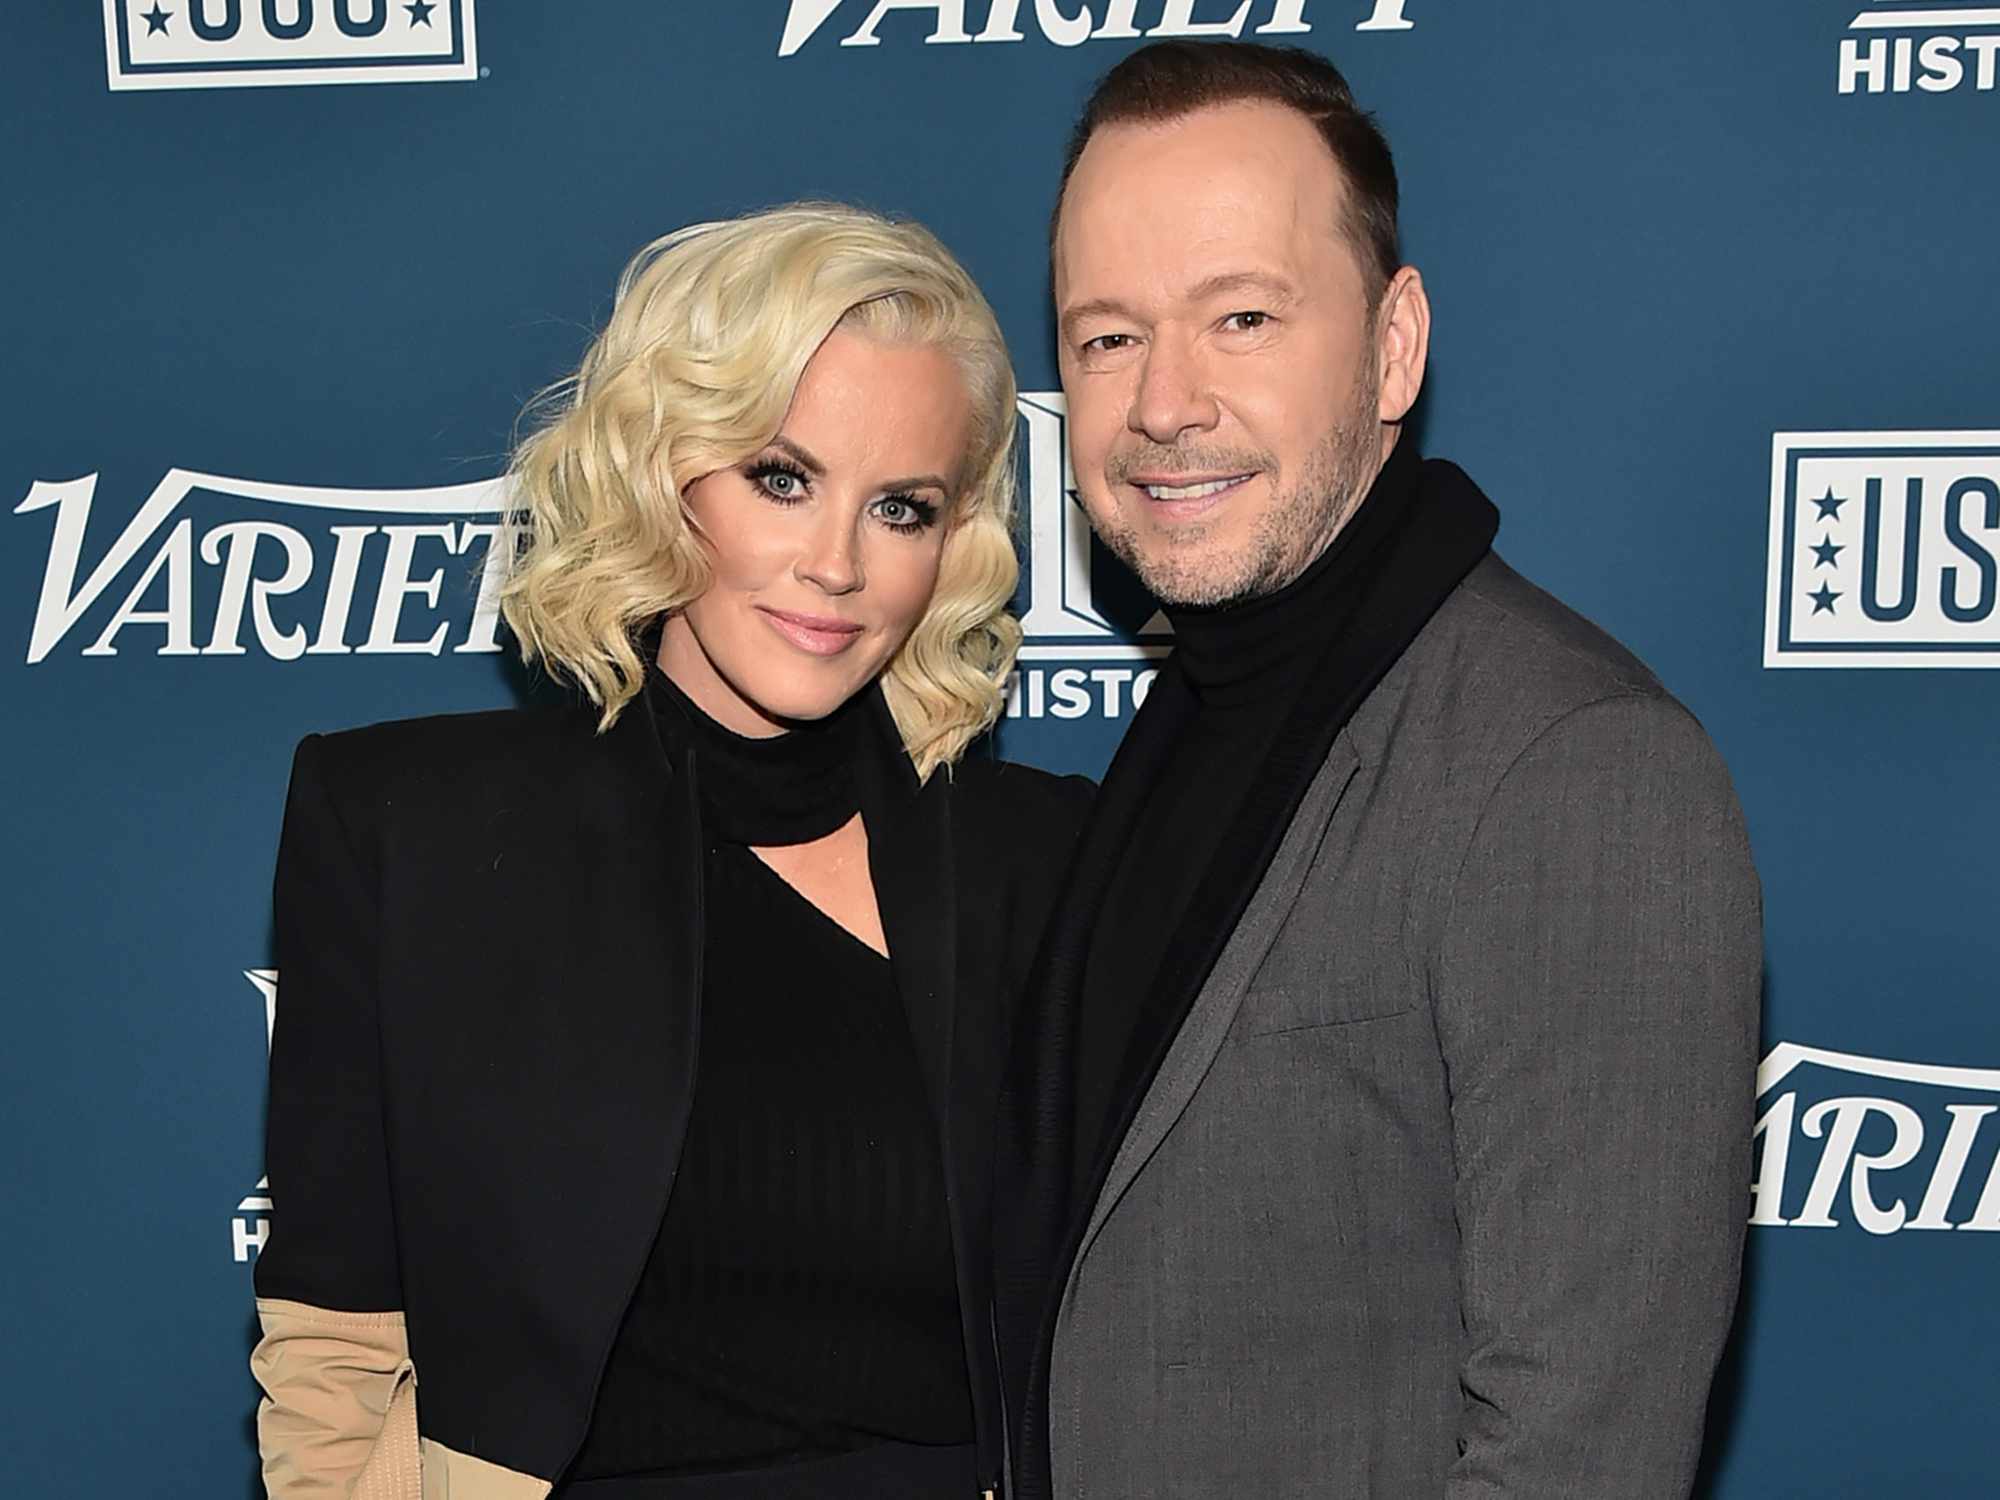 Jenny McCarthy and Donnie Wahlberg attend Variety's 3rd Annual Salute To Service at Cipriani 25 Broadway